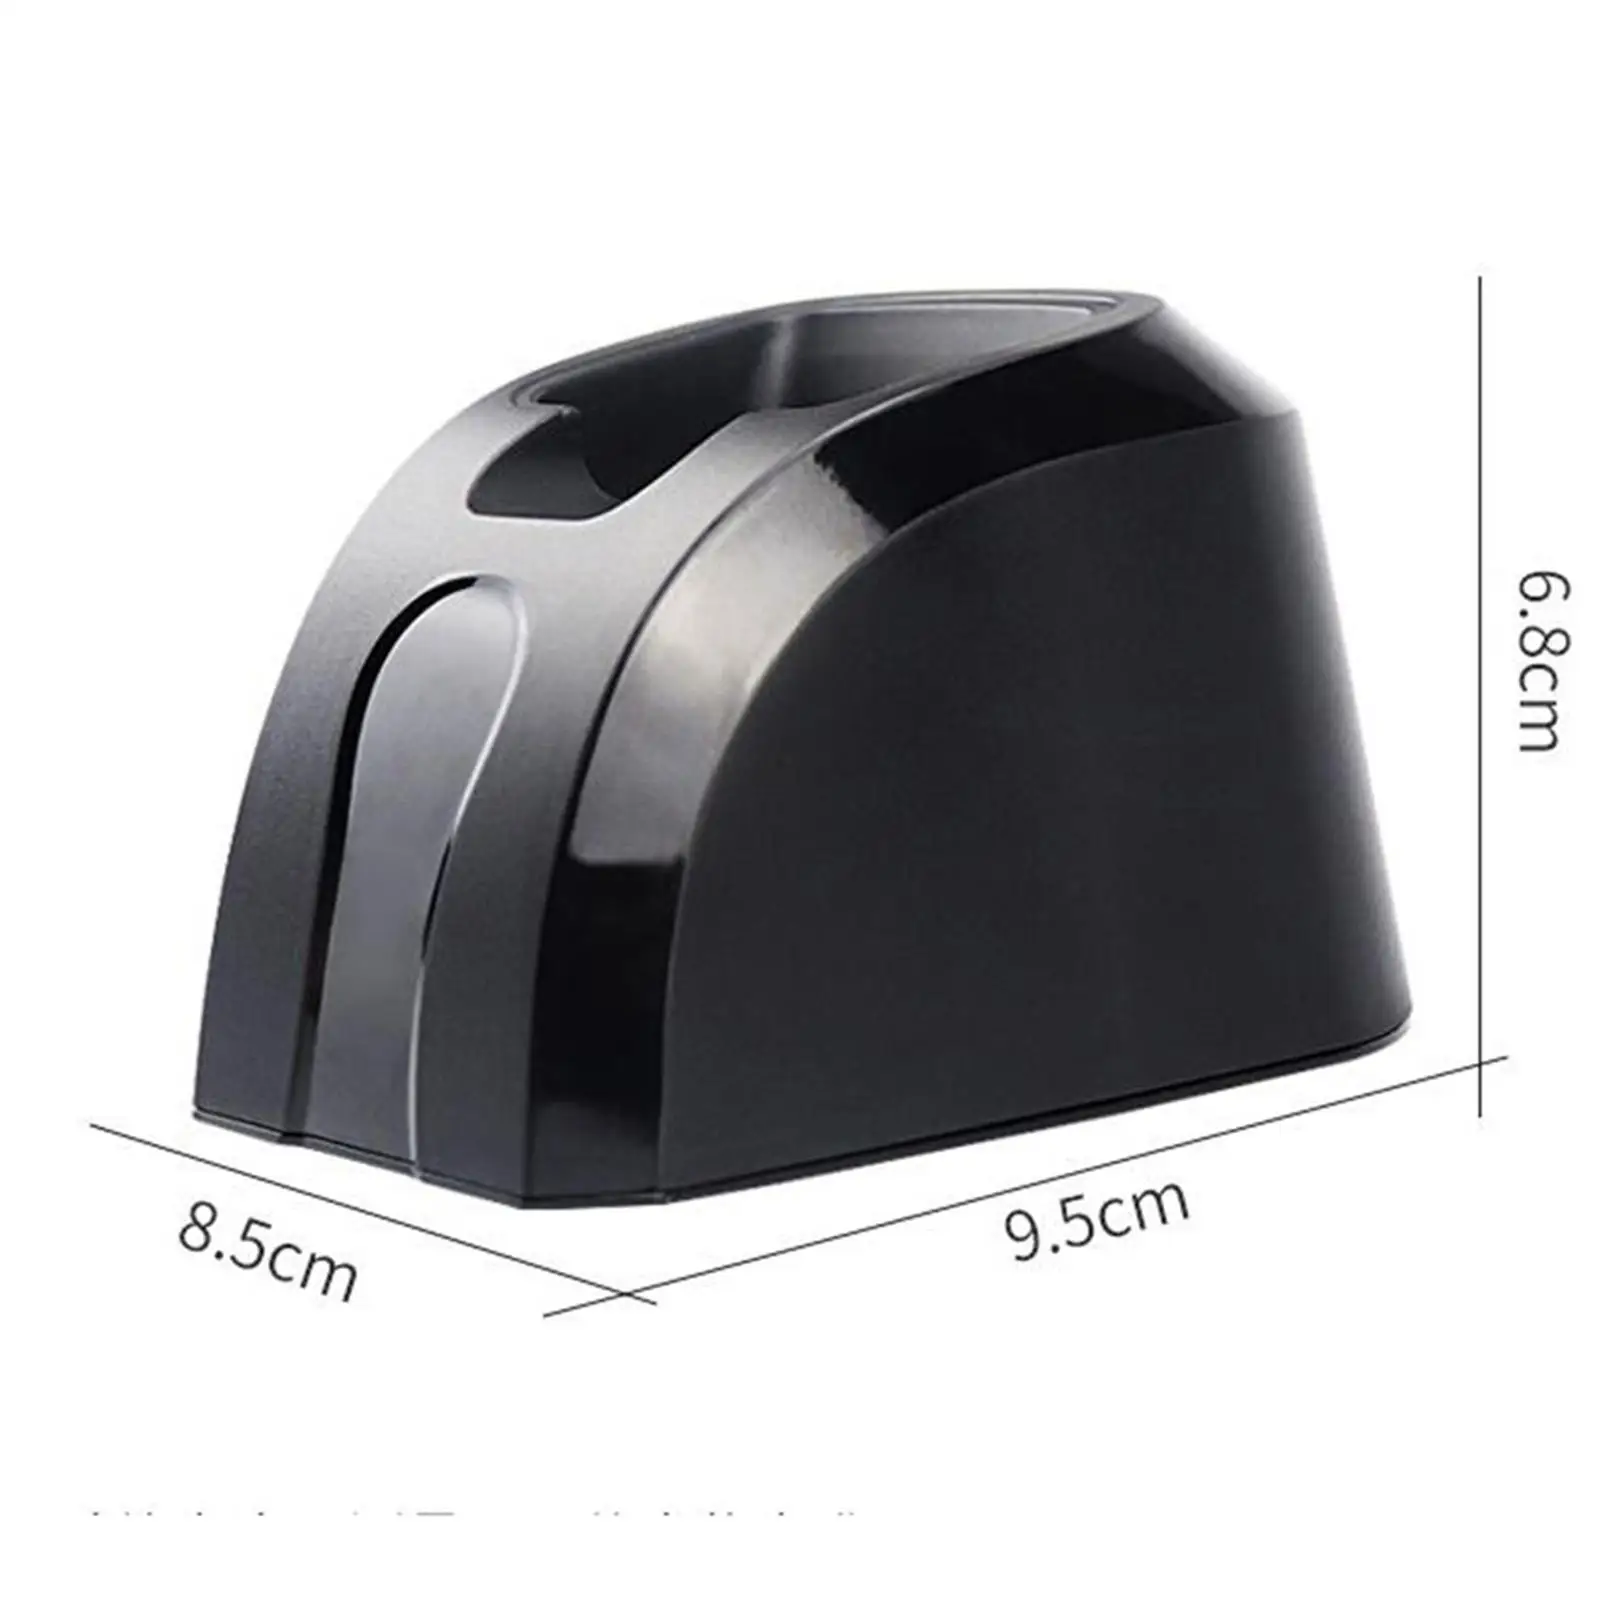 Charging Stand Base for Hair s for Men, Beard Hair , Charging Professional Haircut Barber Salon